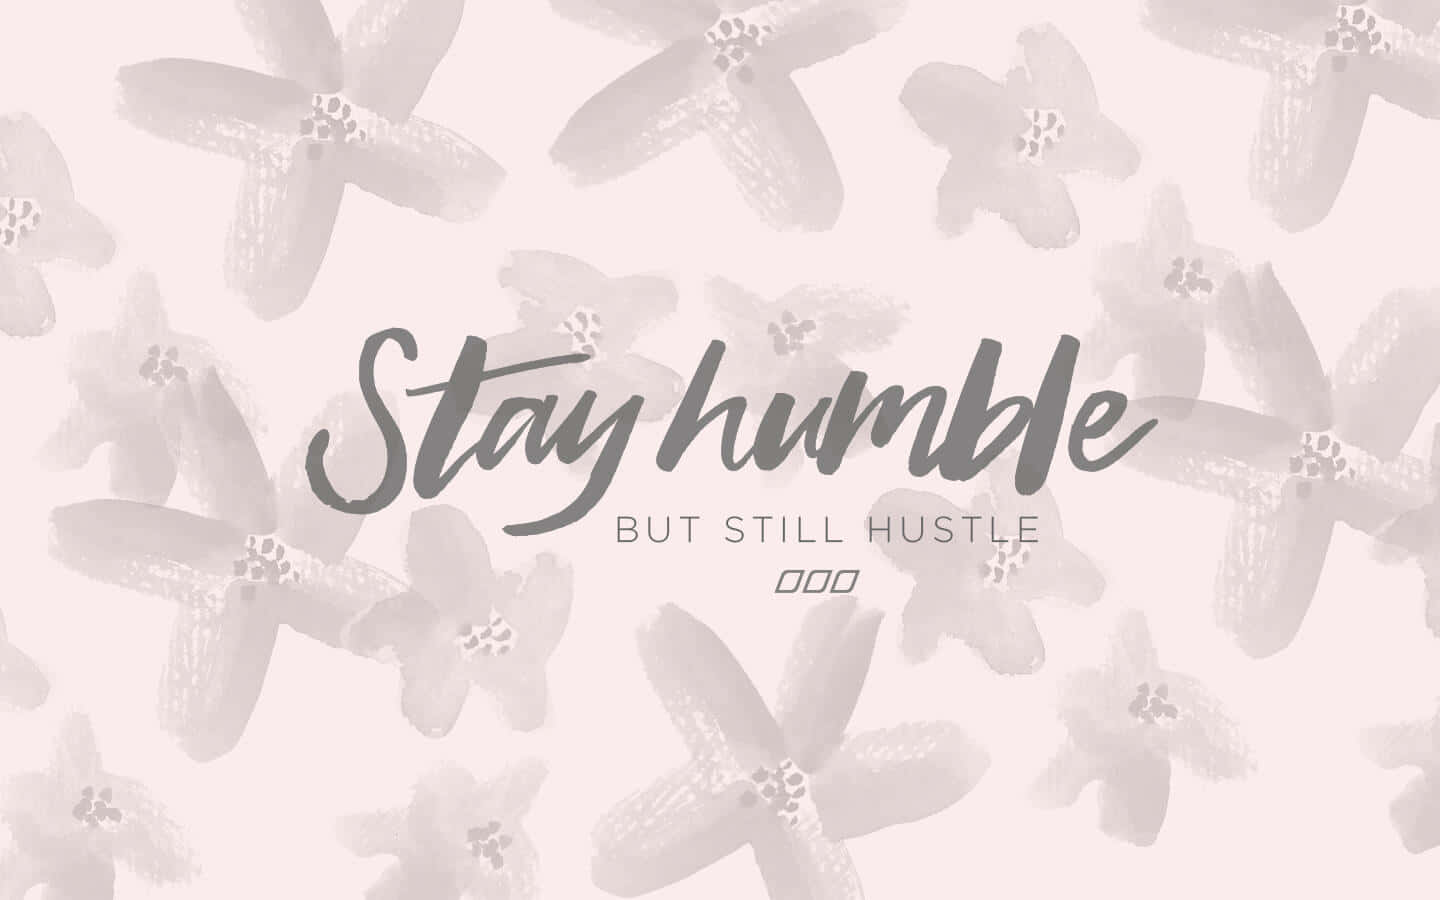 Stay Humble With Starfish Patterns Wallpaper